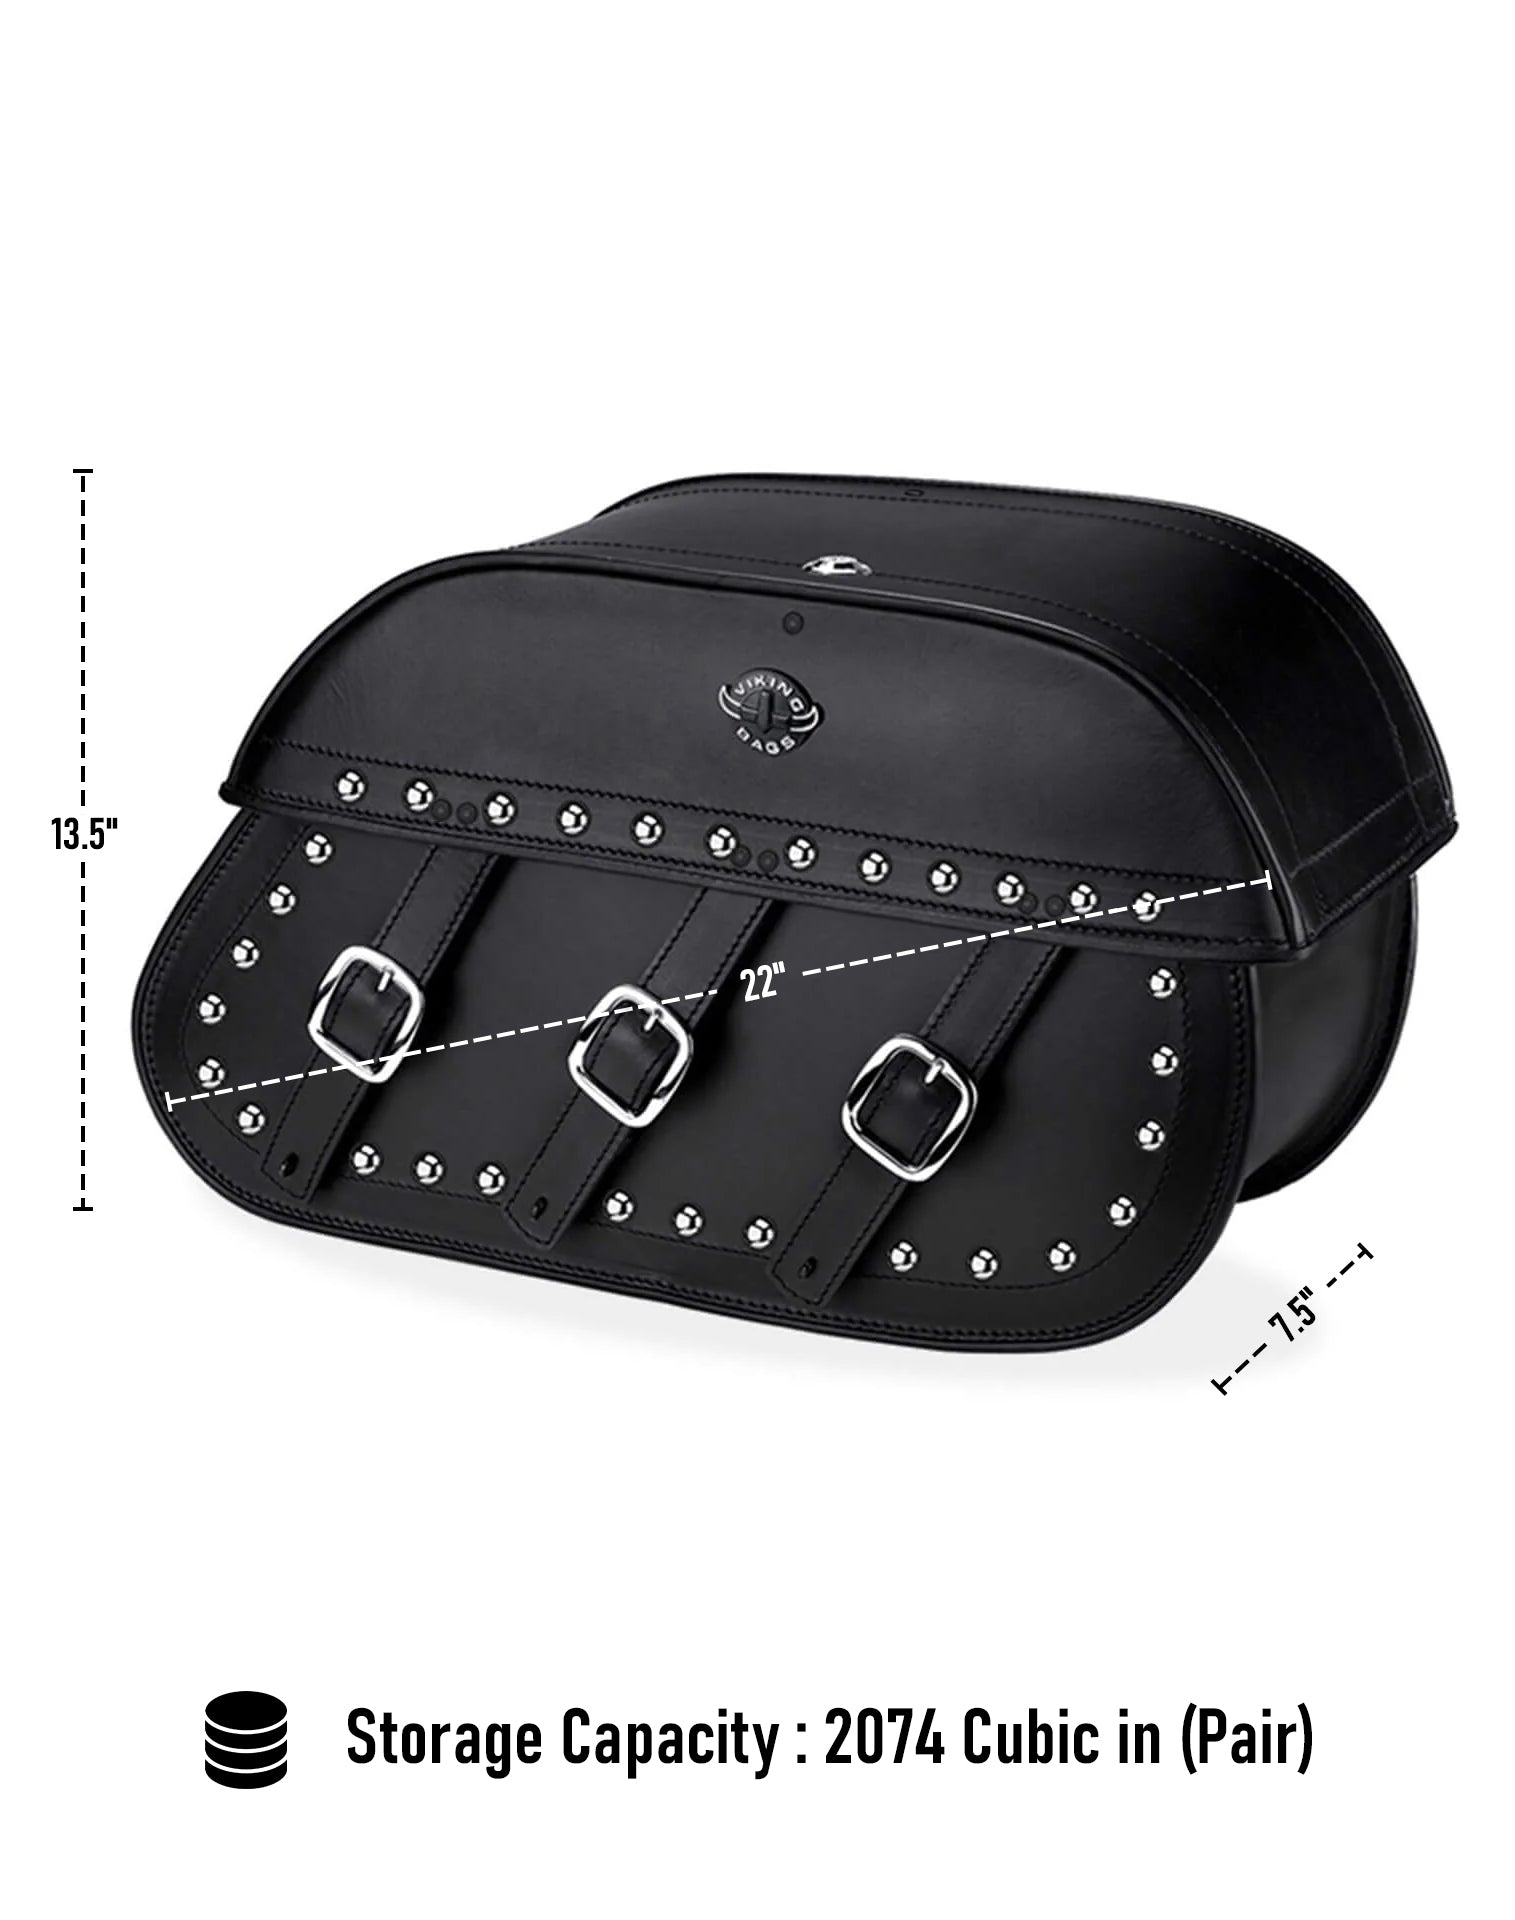 Viking Trianon Extra Large Indian Chief Classic Studded Leather Motorcycle Saddlebags Can Store Your Ridings Gears